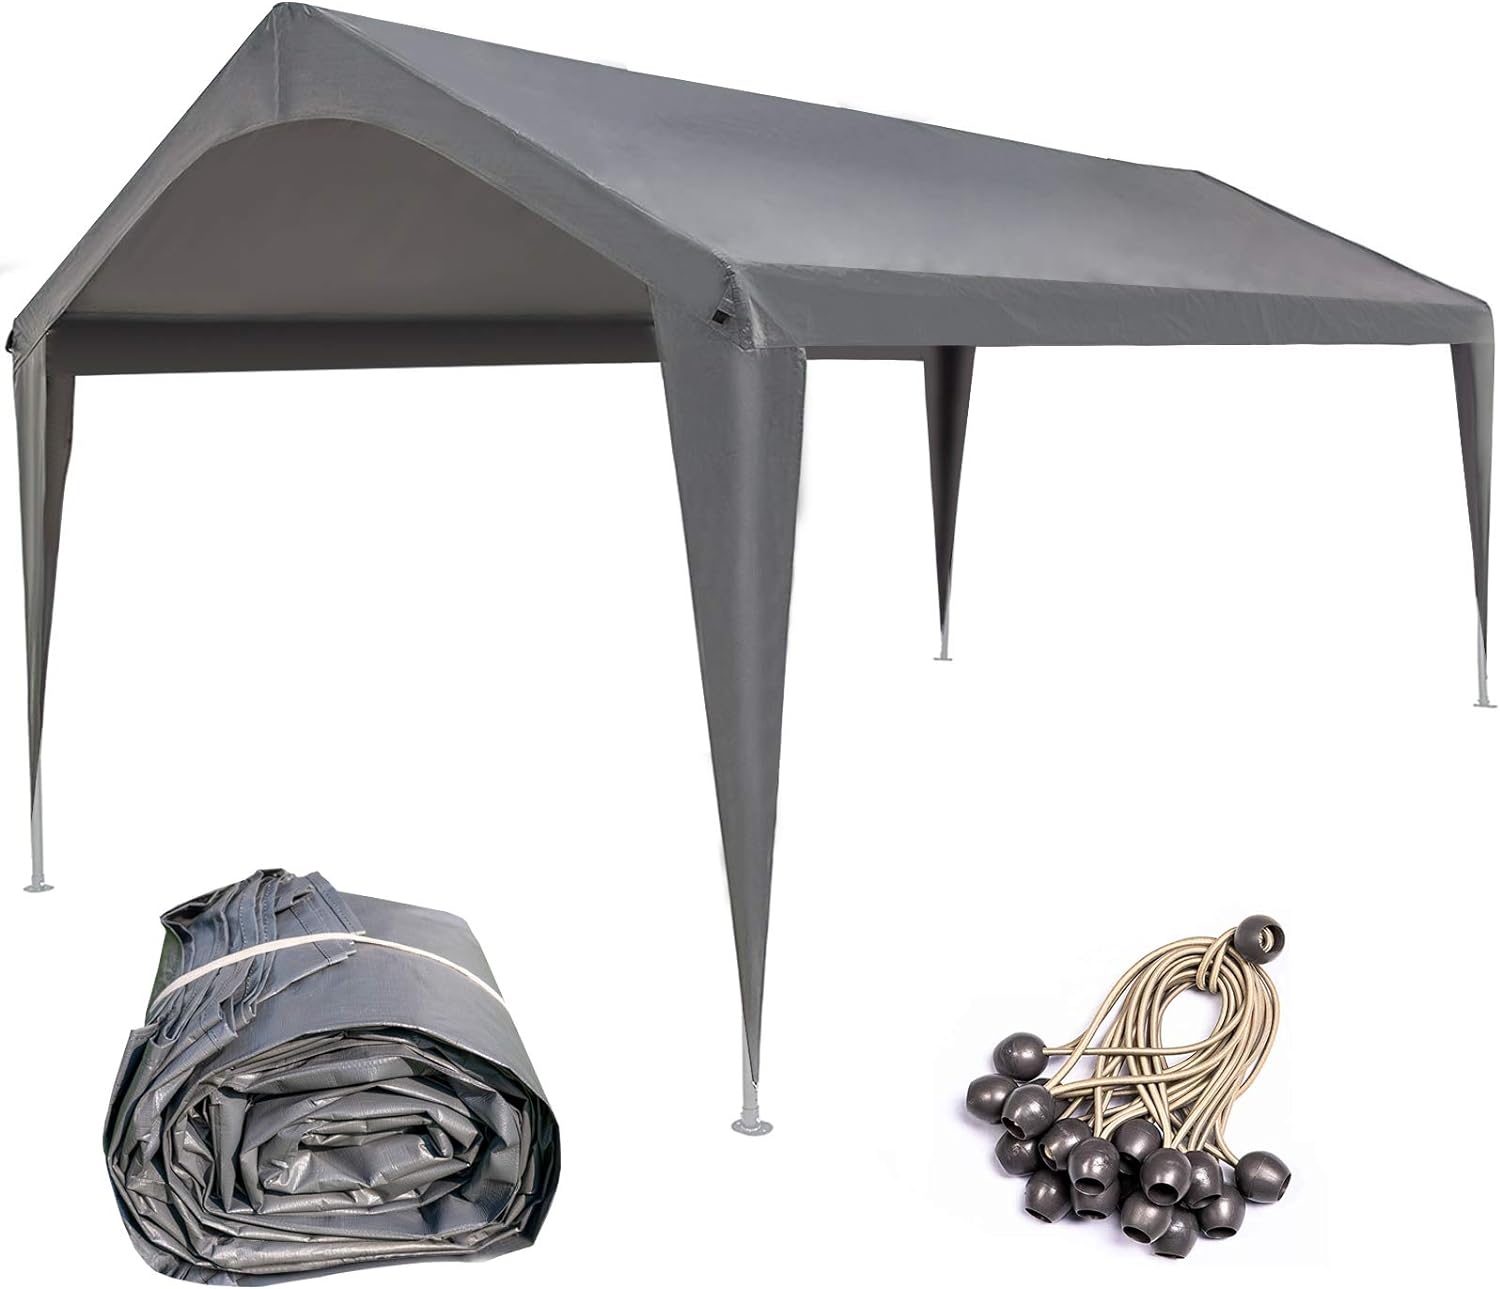 Sunnyglade 10x20 Feet Carport Replacement Top Canopy Cover with Fabric Pole Skirts and Accessories for Car Garage Shelter Tent, Dark Grey(